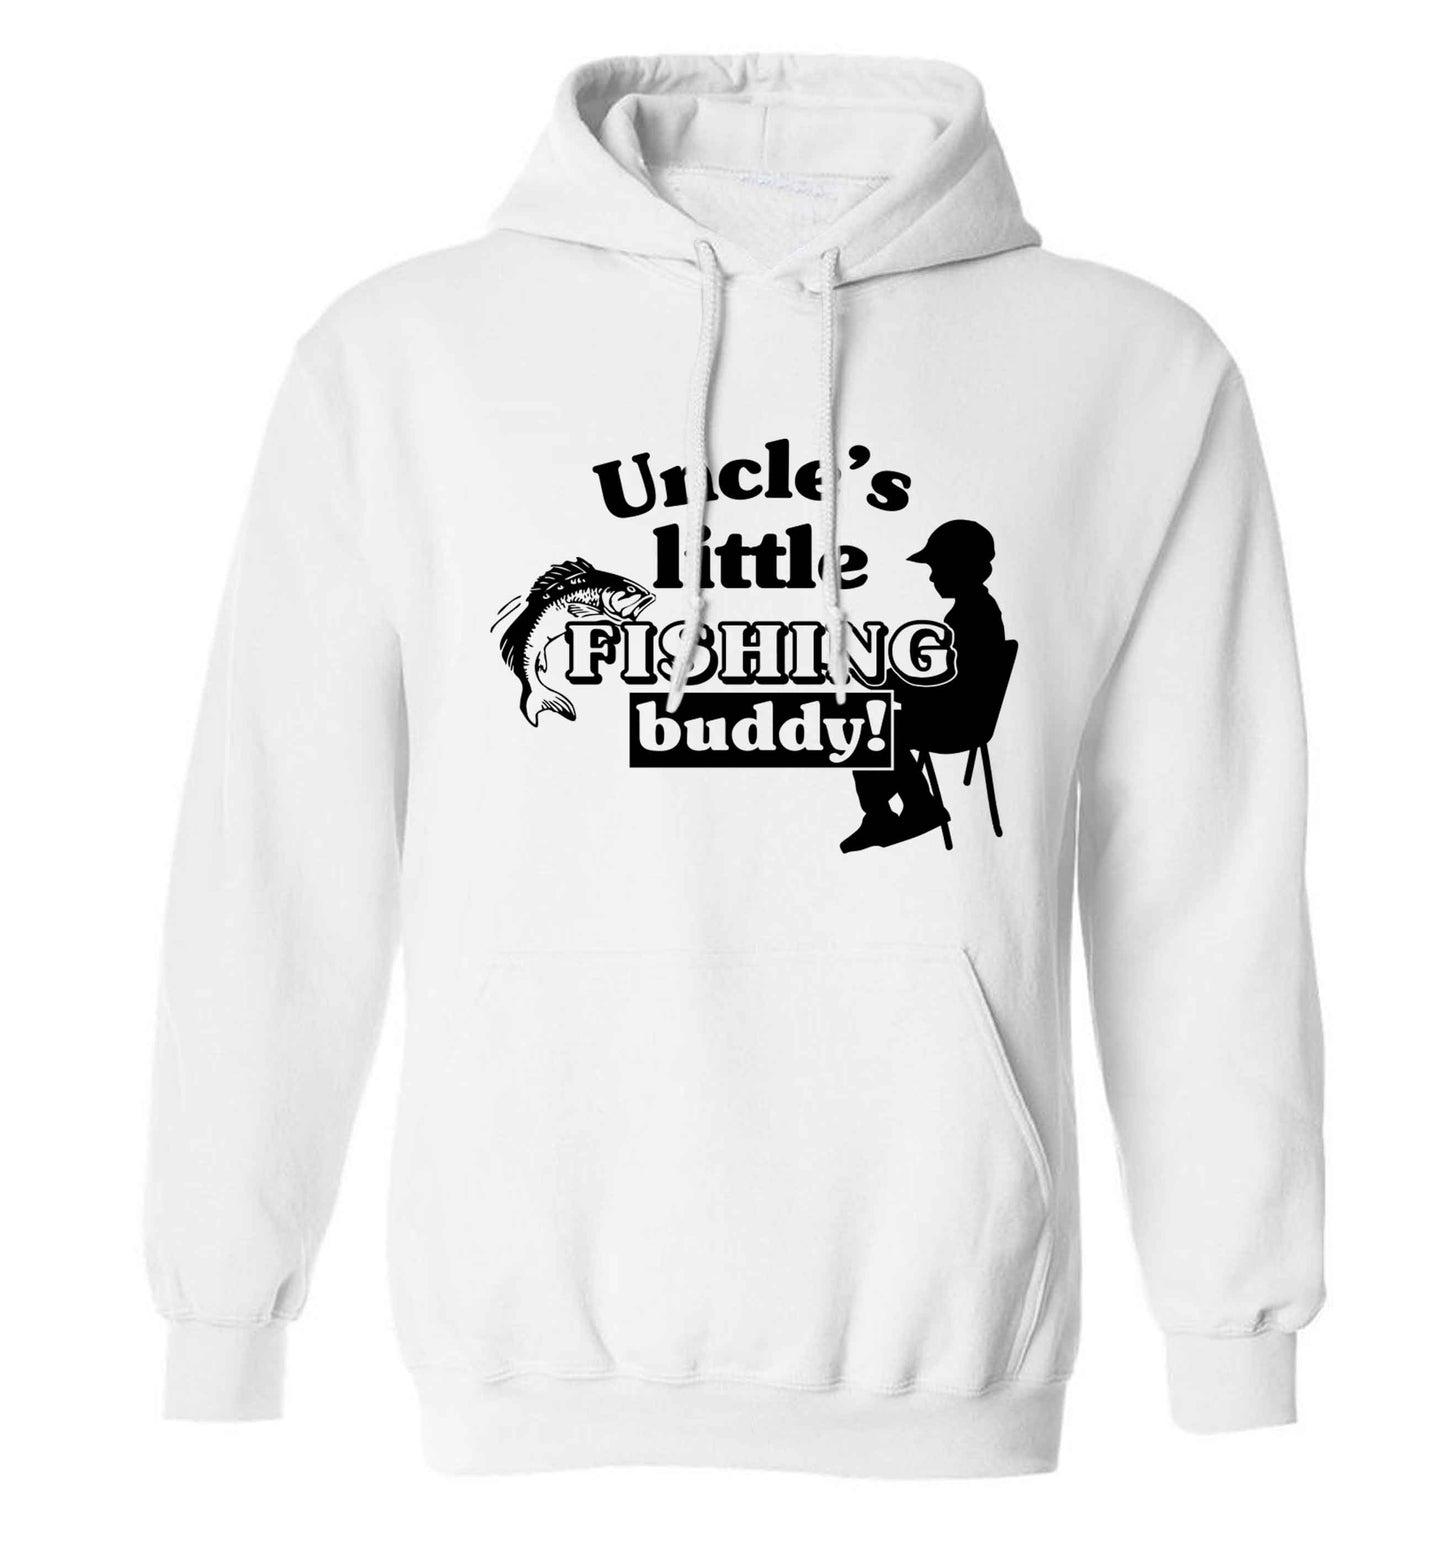 Uncle's little fishing buddy adults unisex white hoodie 2XL